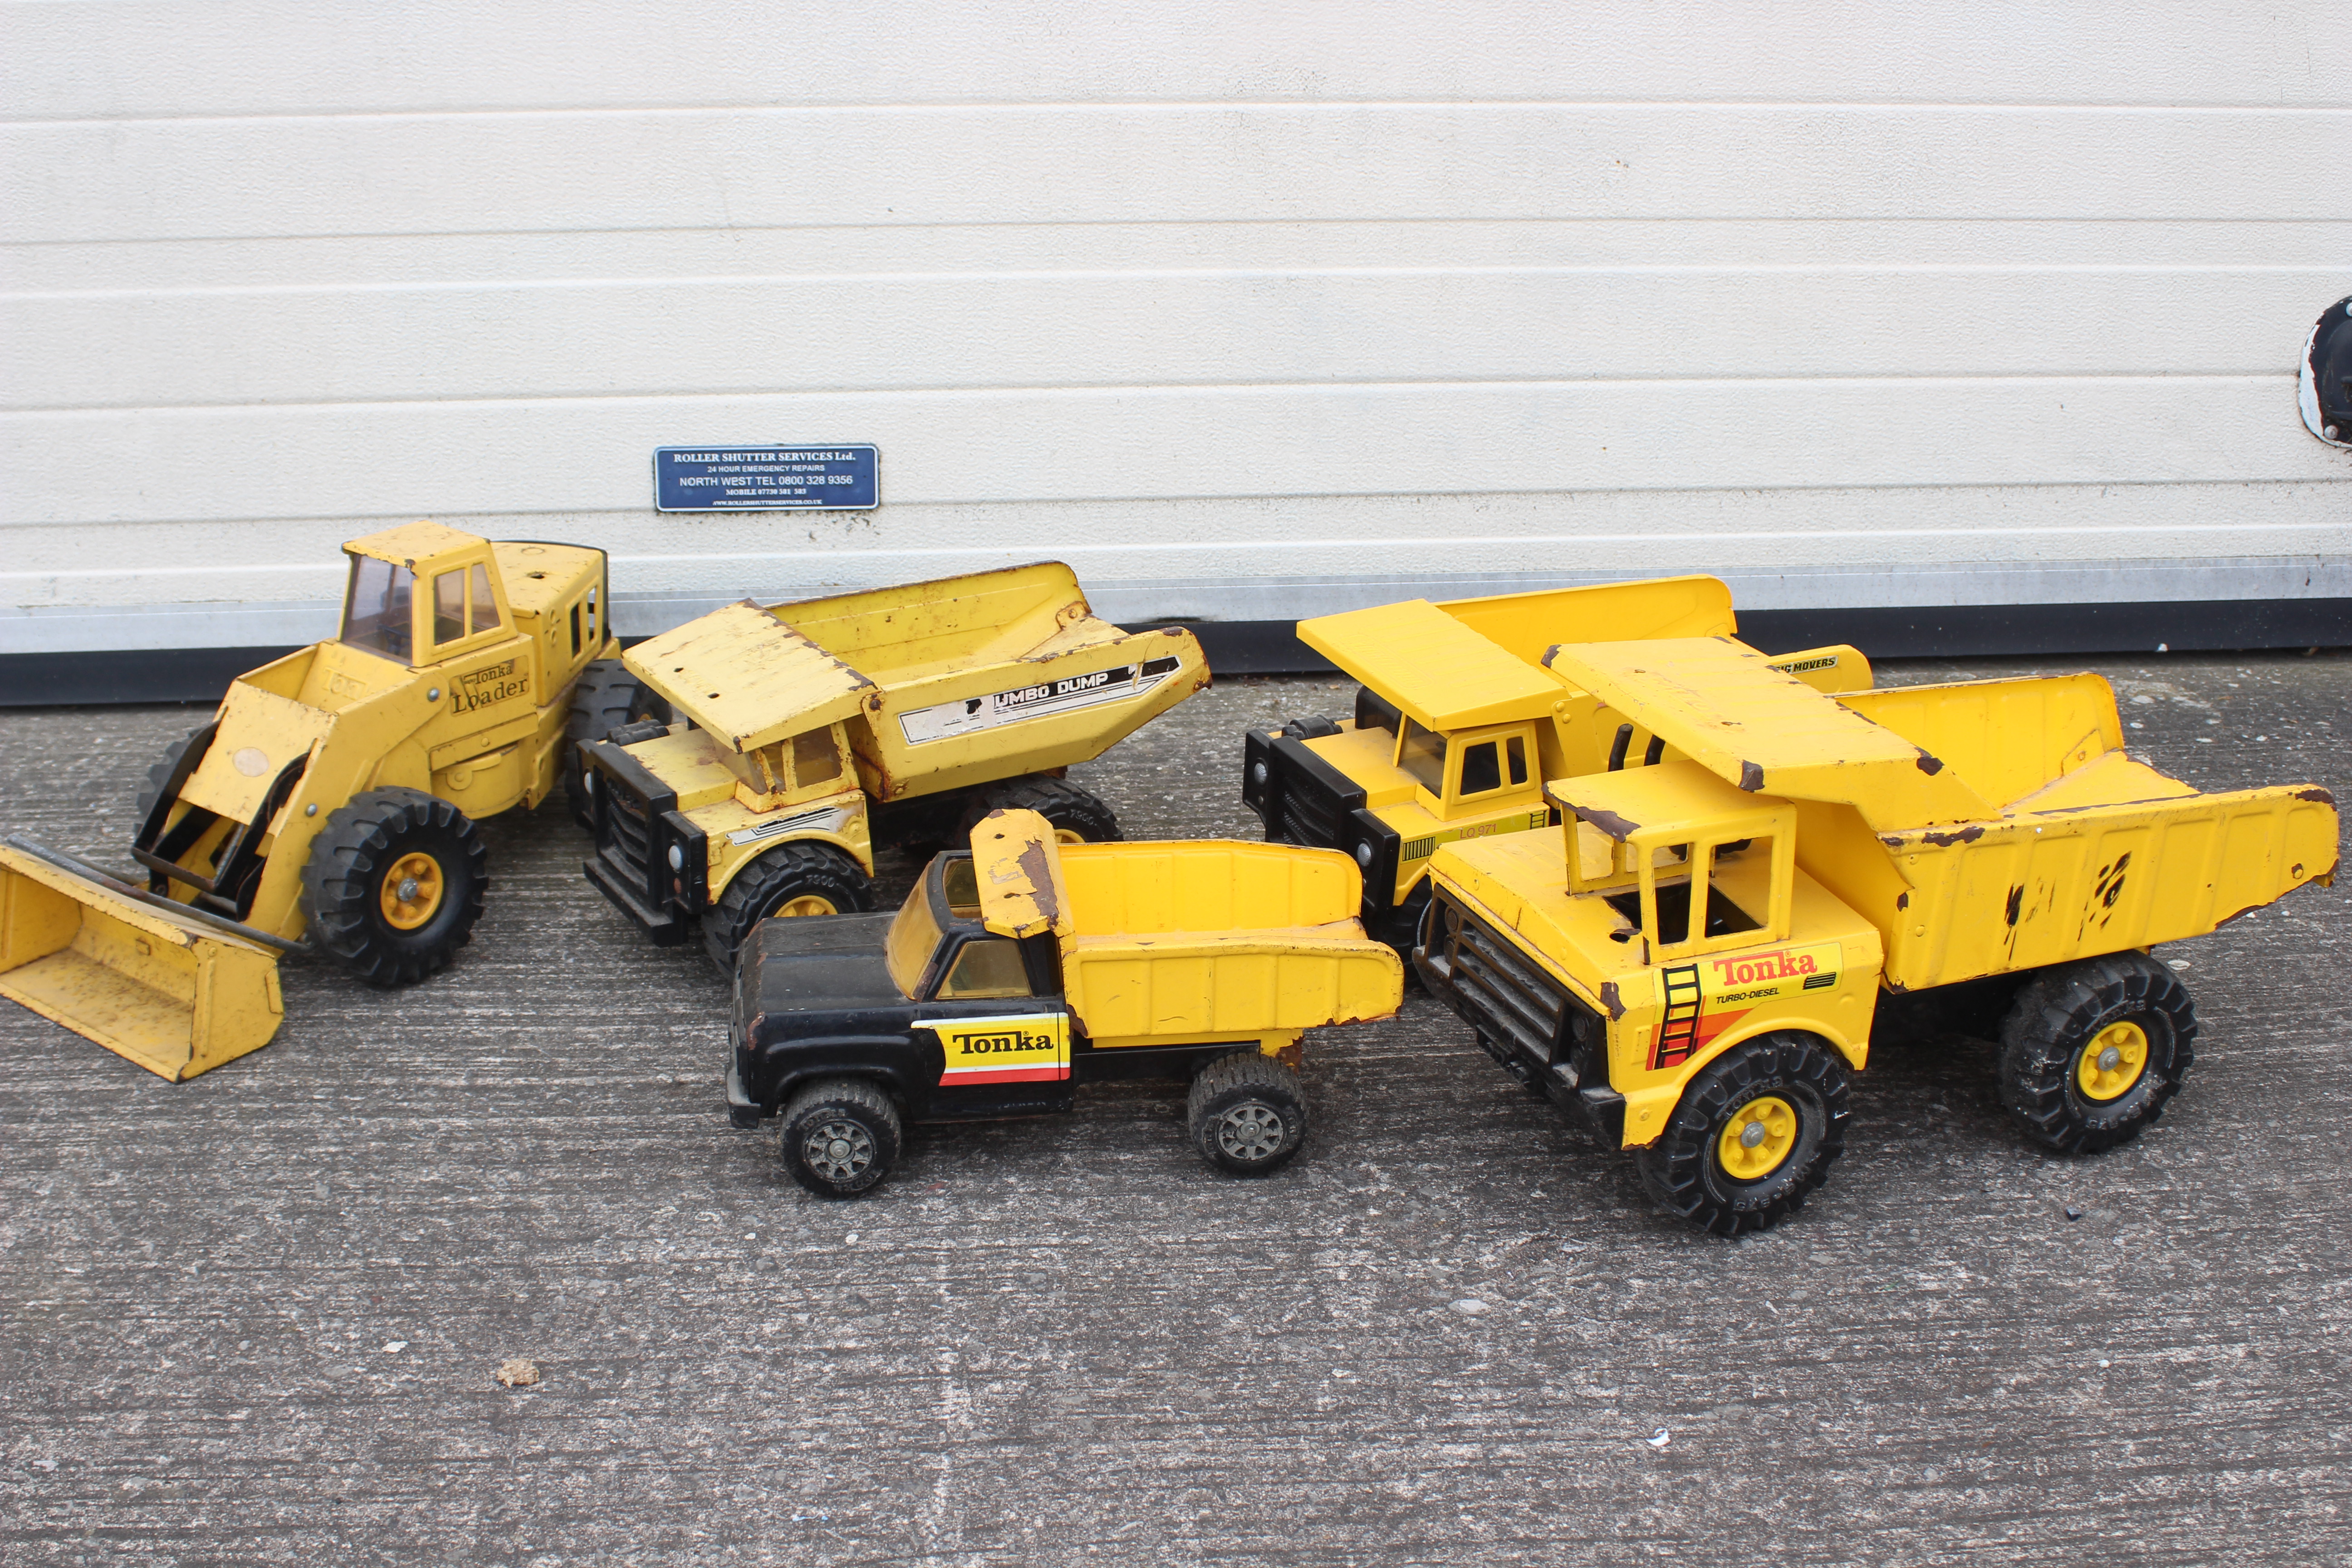 Tonka - Matchbox - Clover - 5 x large vintage Tonka construction vehicles including a Mighty Loader,